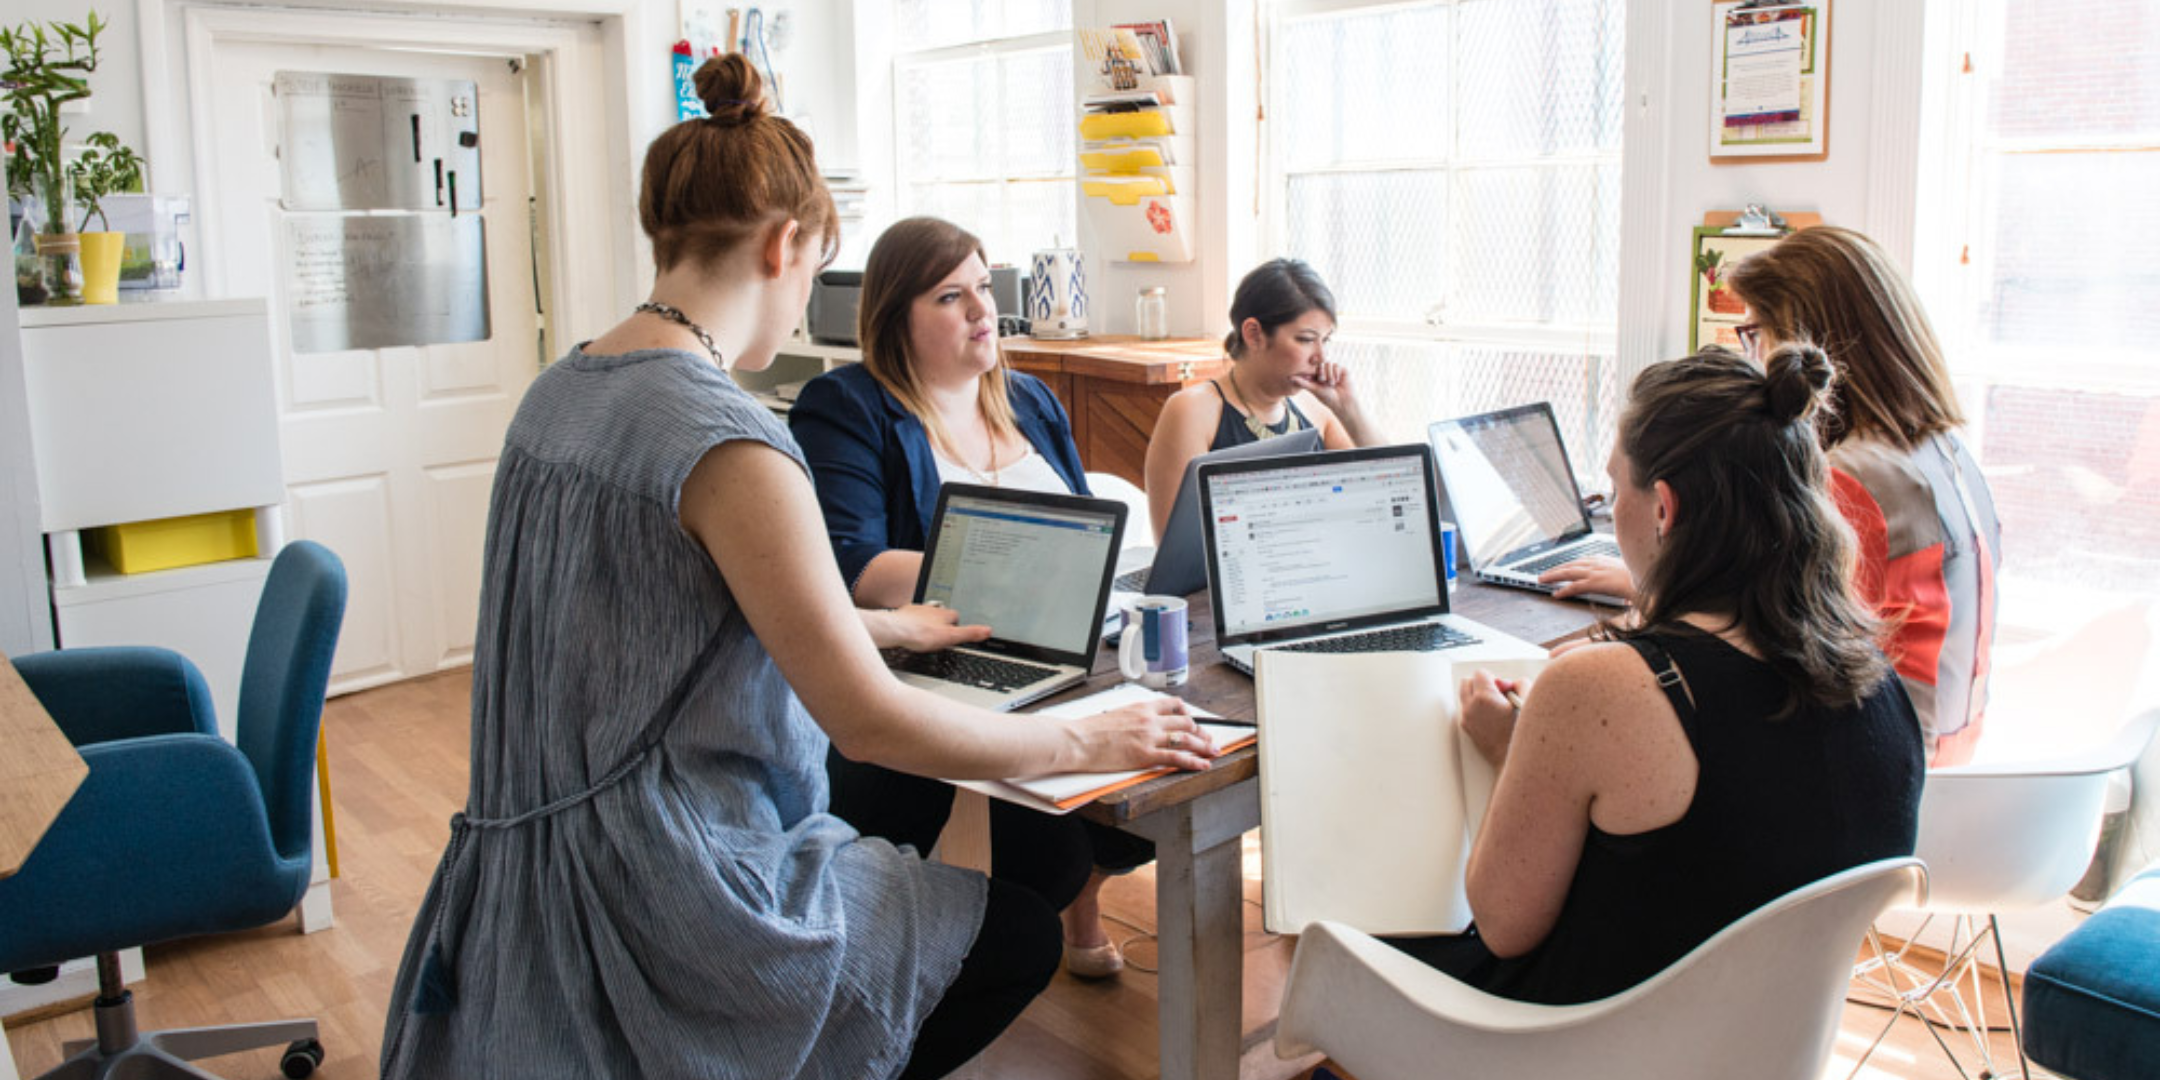 A group of women are sitting around a table at their laptops